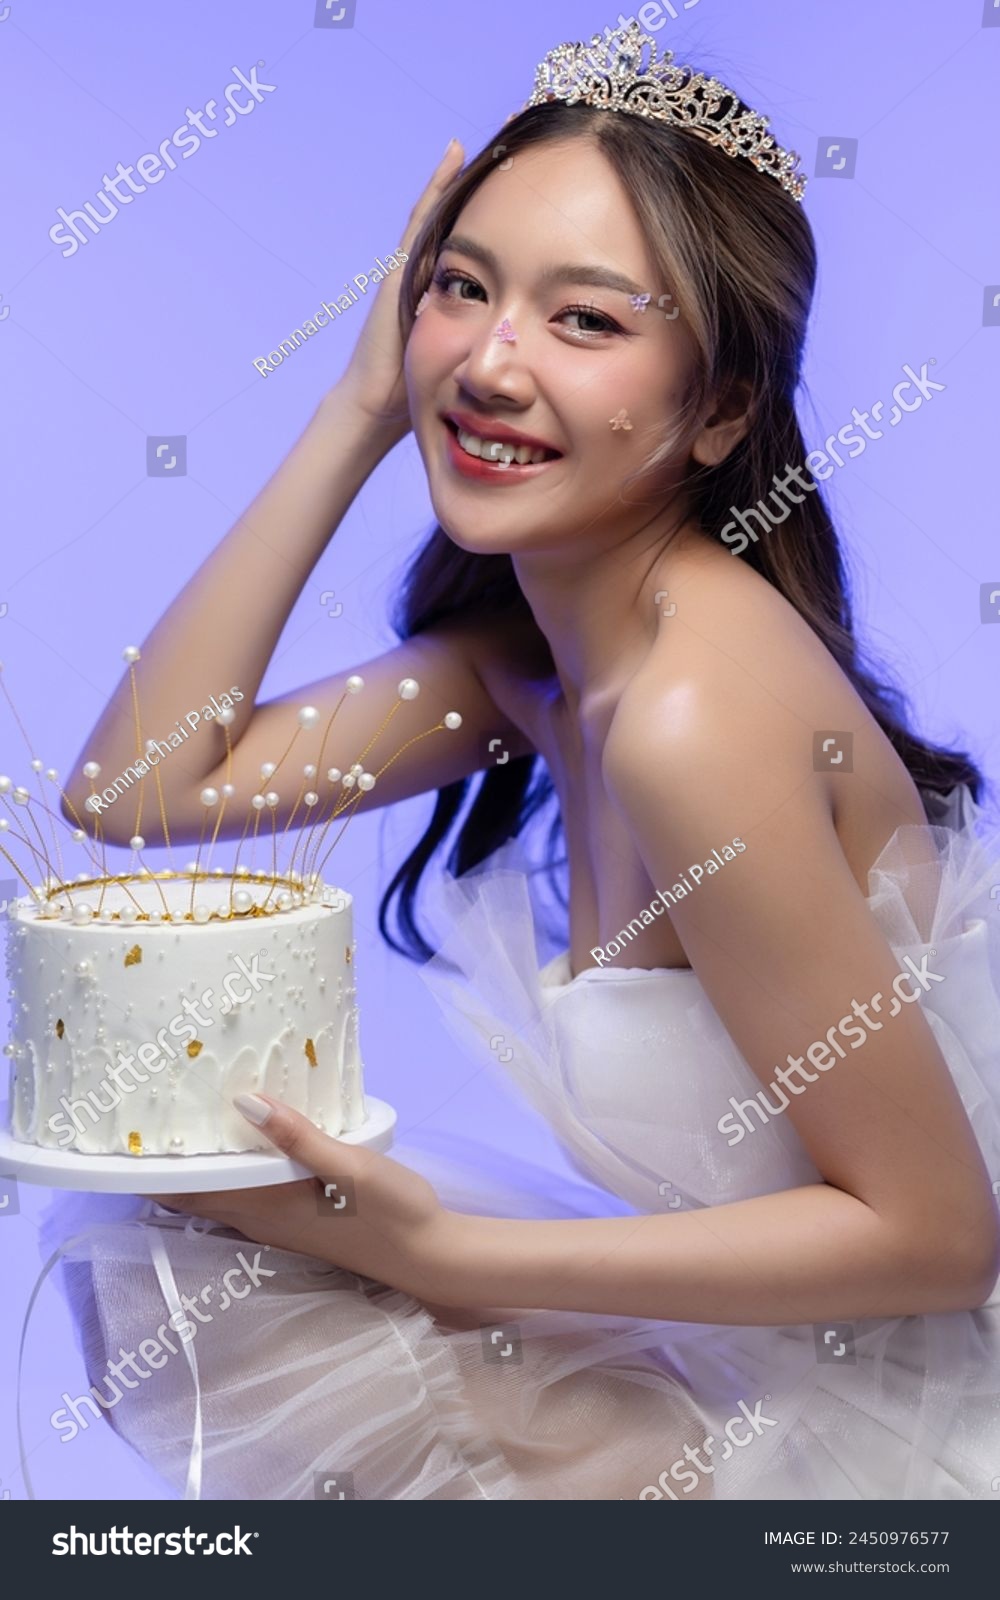 Happy beautiful Asian girl in princess dress showing birthday cake. Birthday princess photography theme is popular in social network. #2450976577